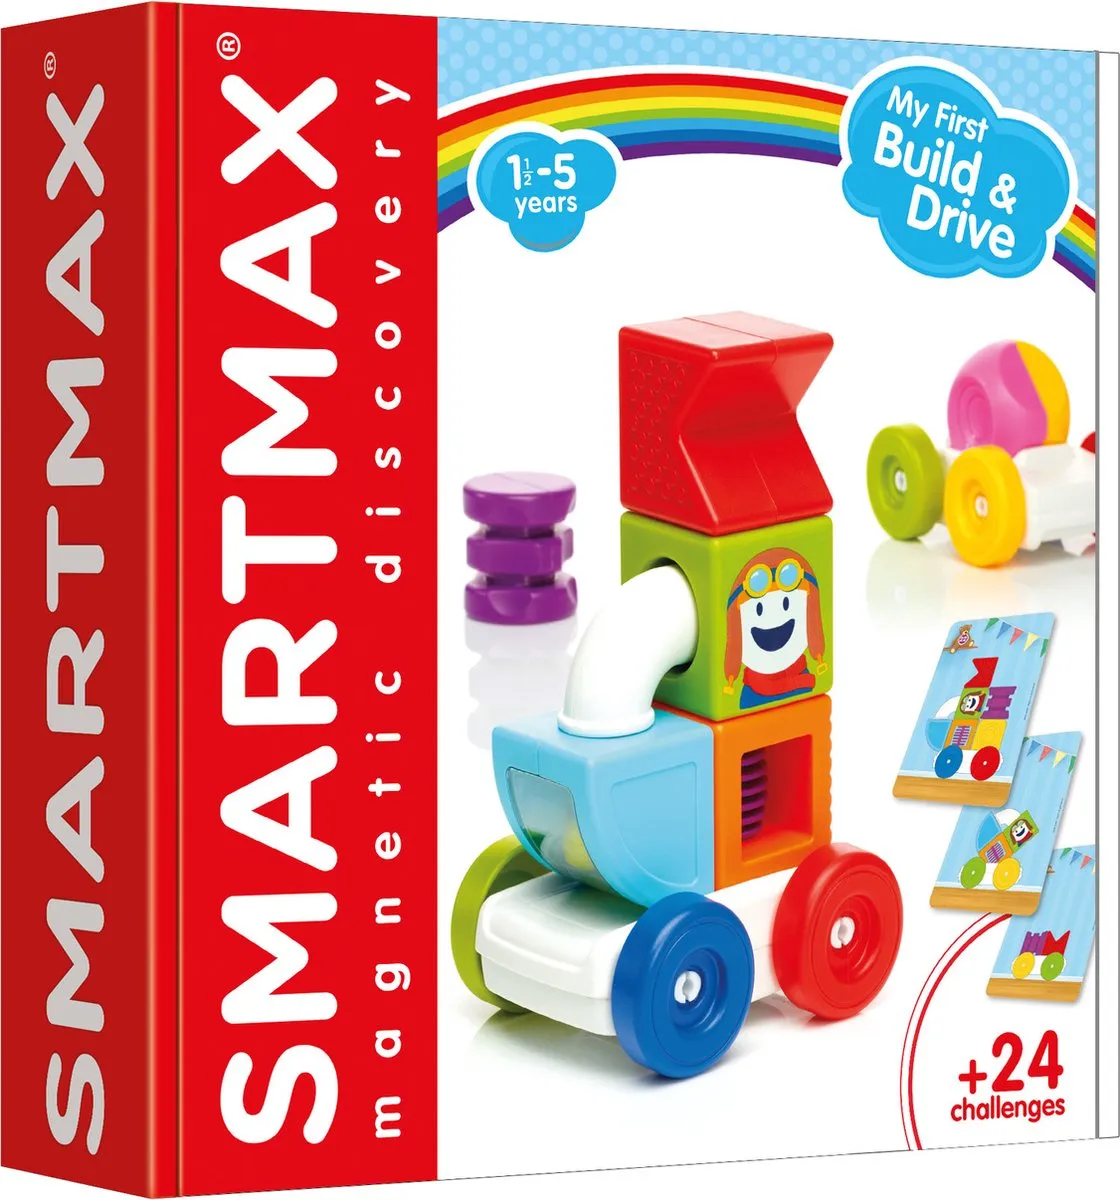 SmartMax Build & Roll (44 pcs) STEM Magnetic Discovery Building Set Ages 3+